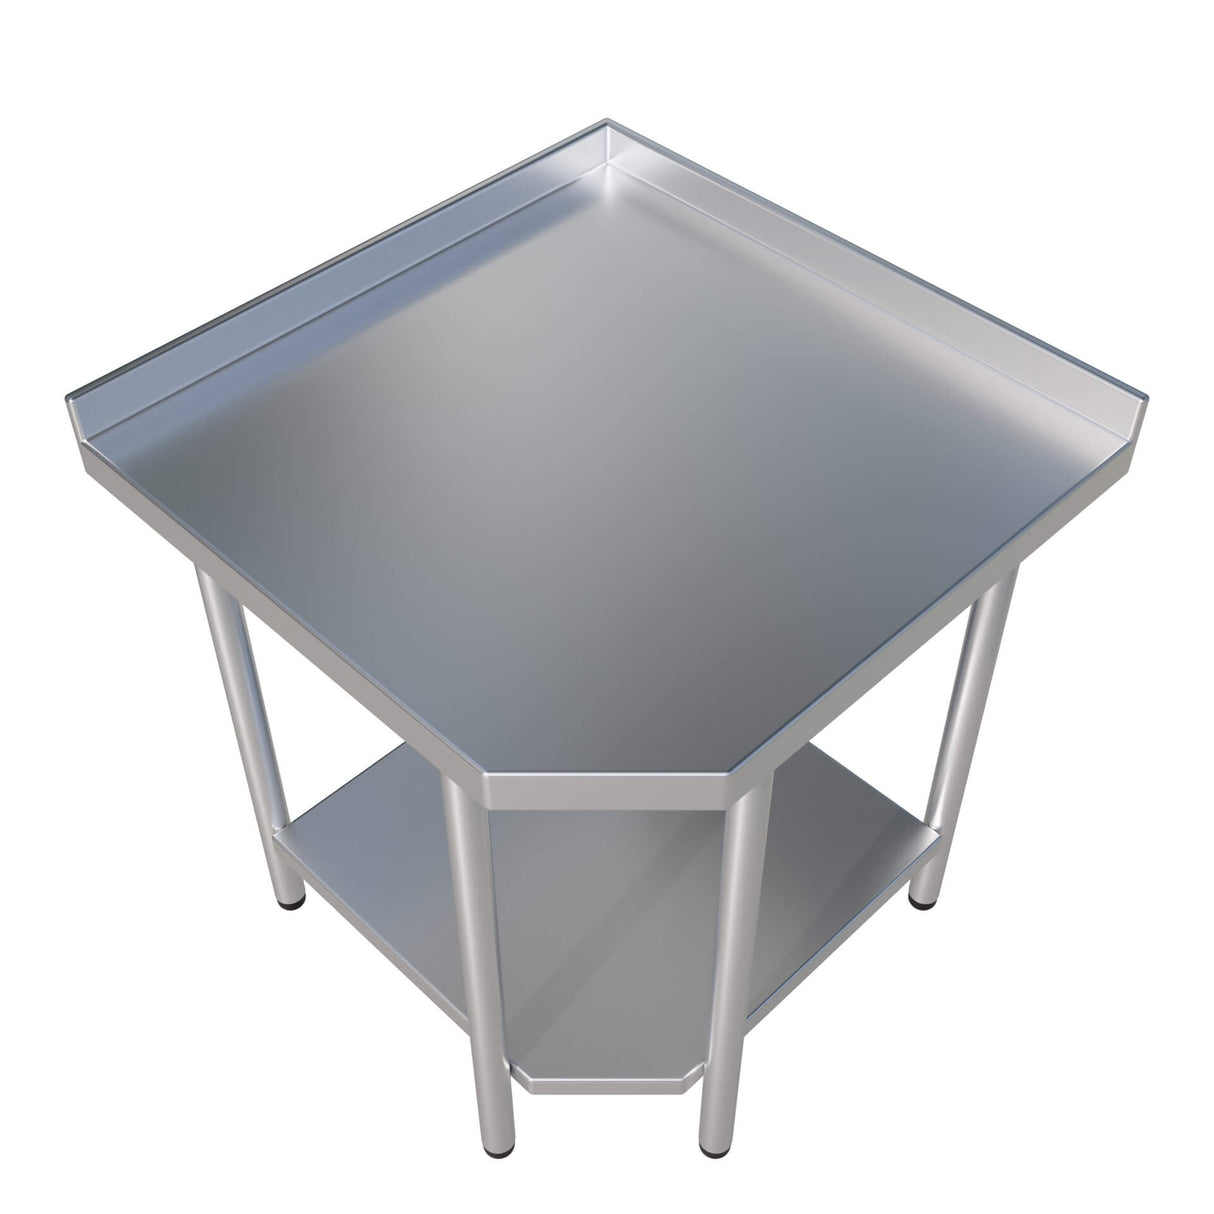 Empire Stainless Steel Corner Prep Table With Upstand - CORNER-1